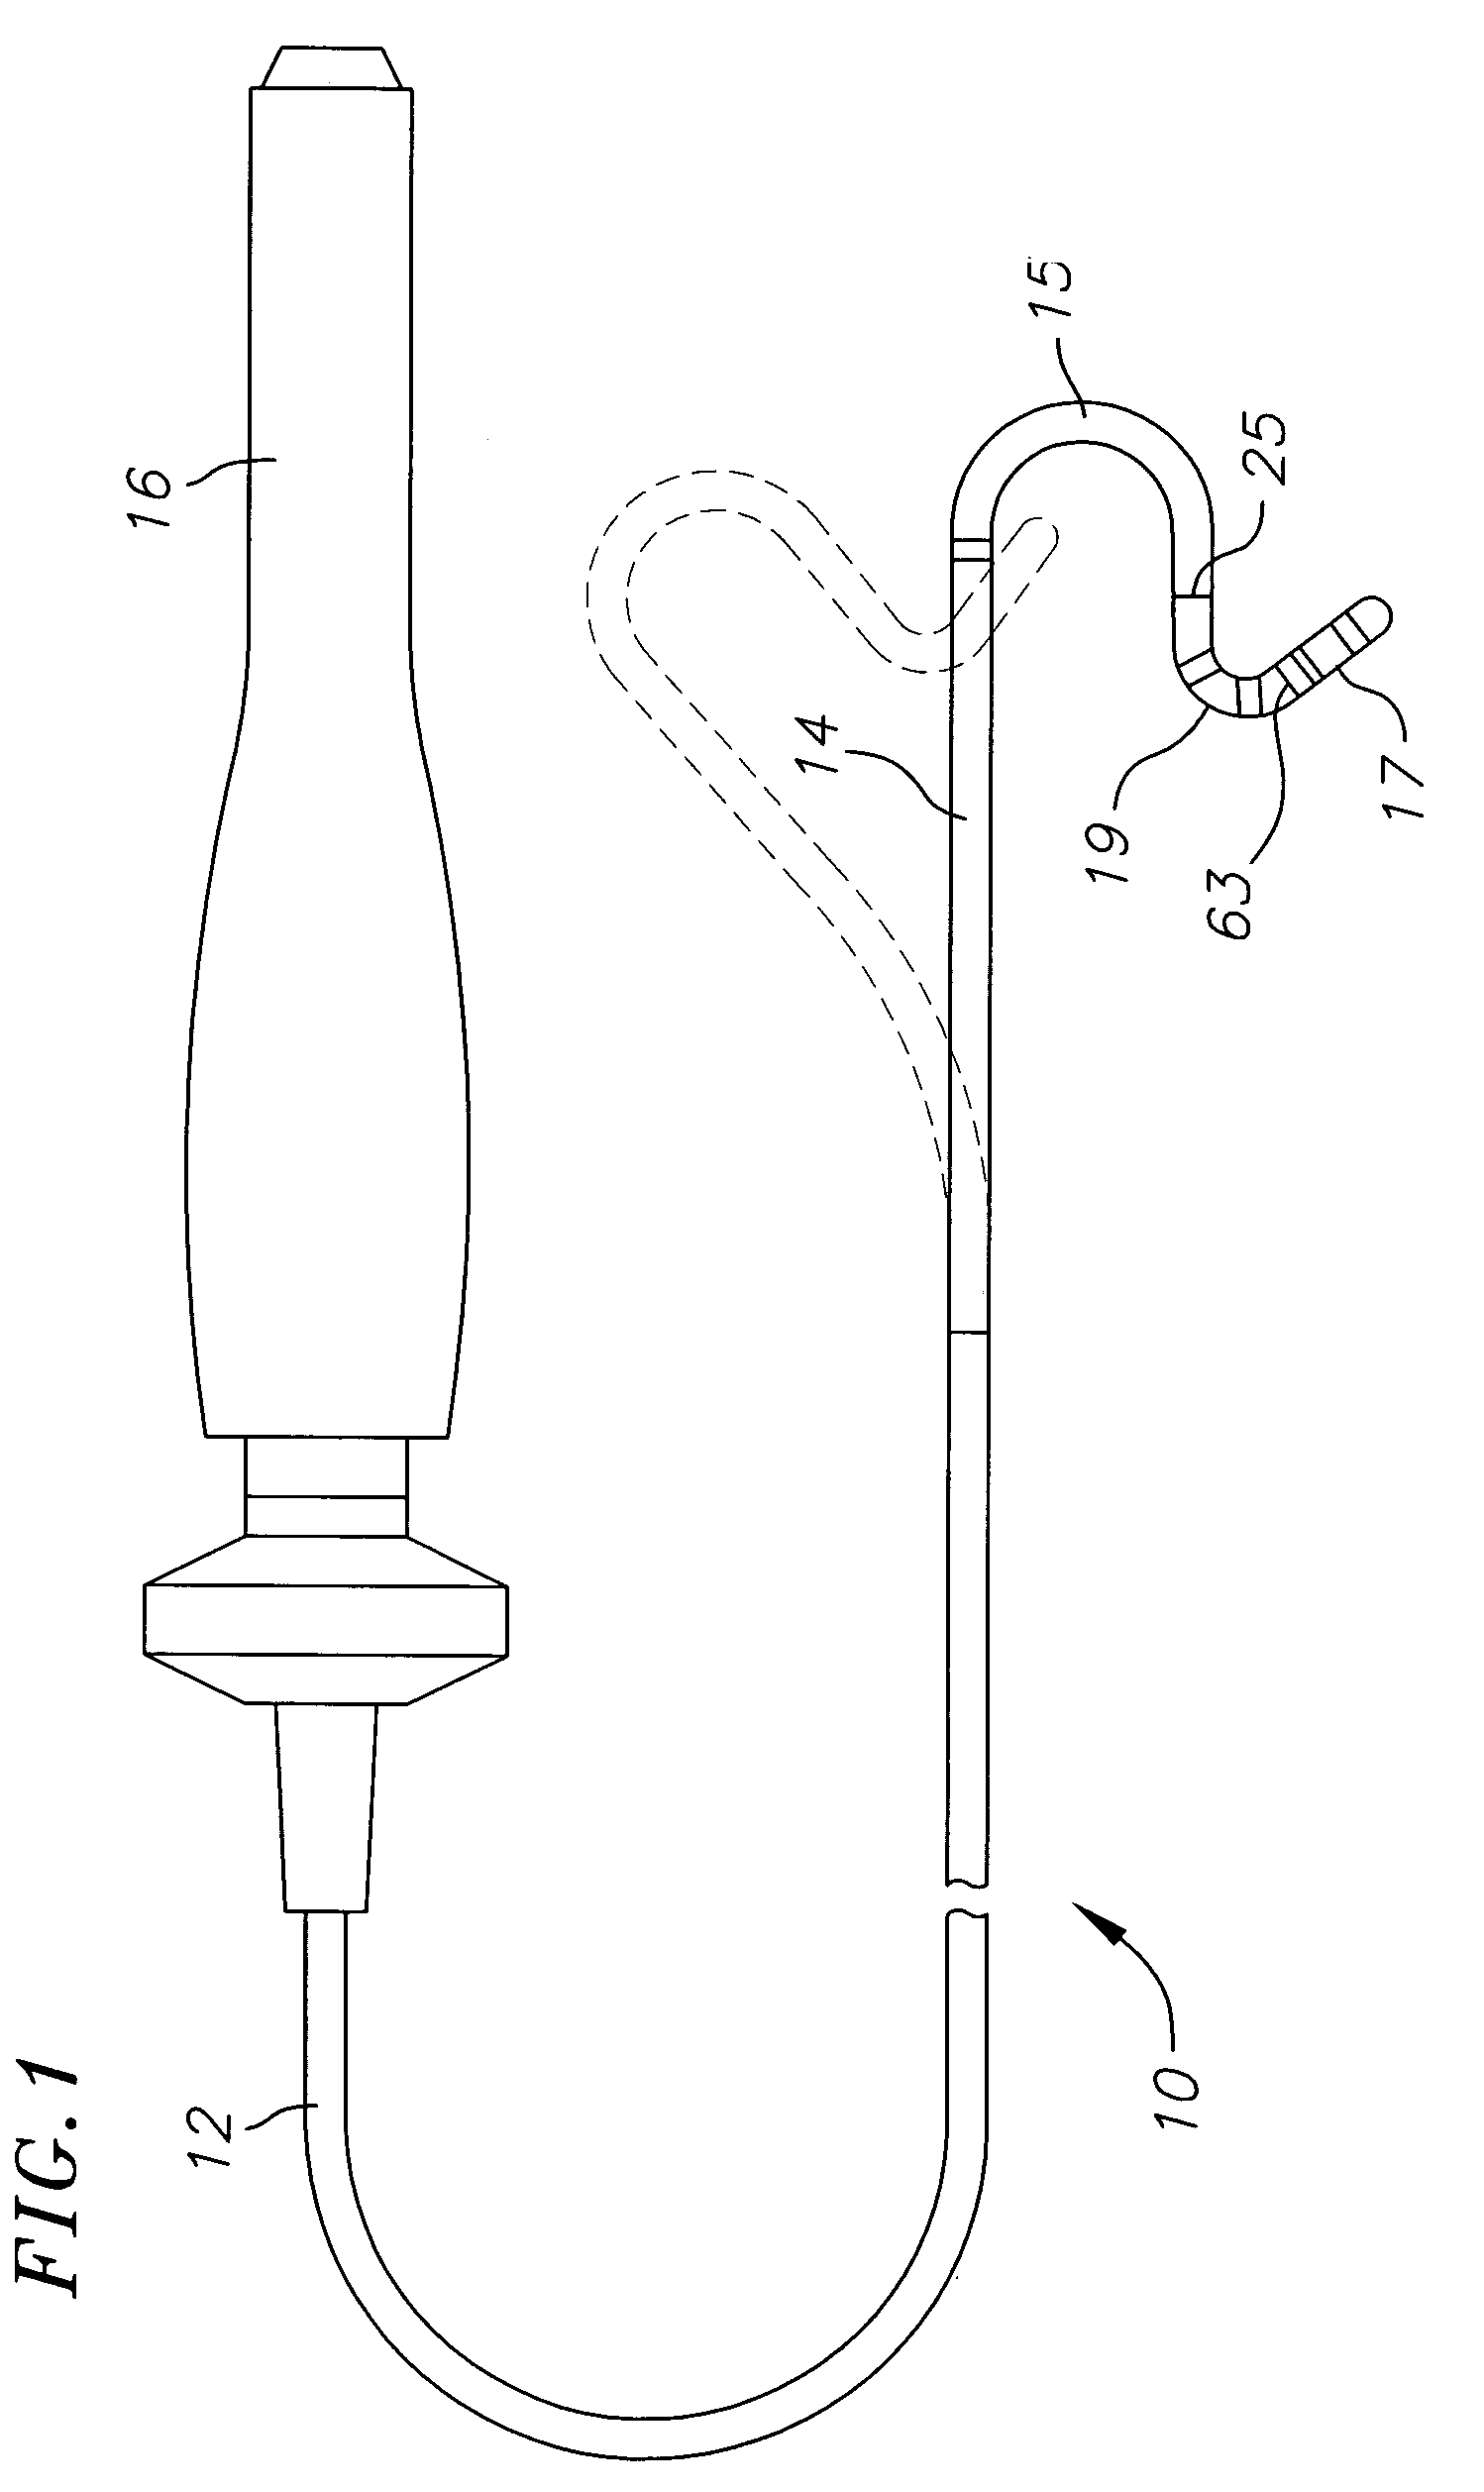 Catheter with flexible pre-shaped tip section